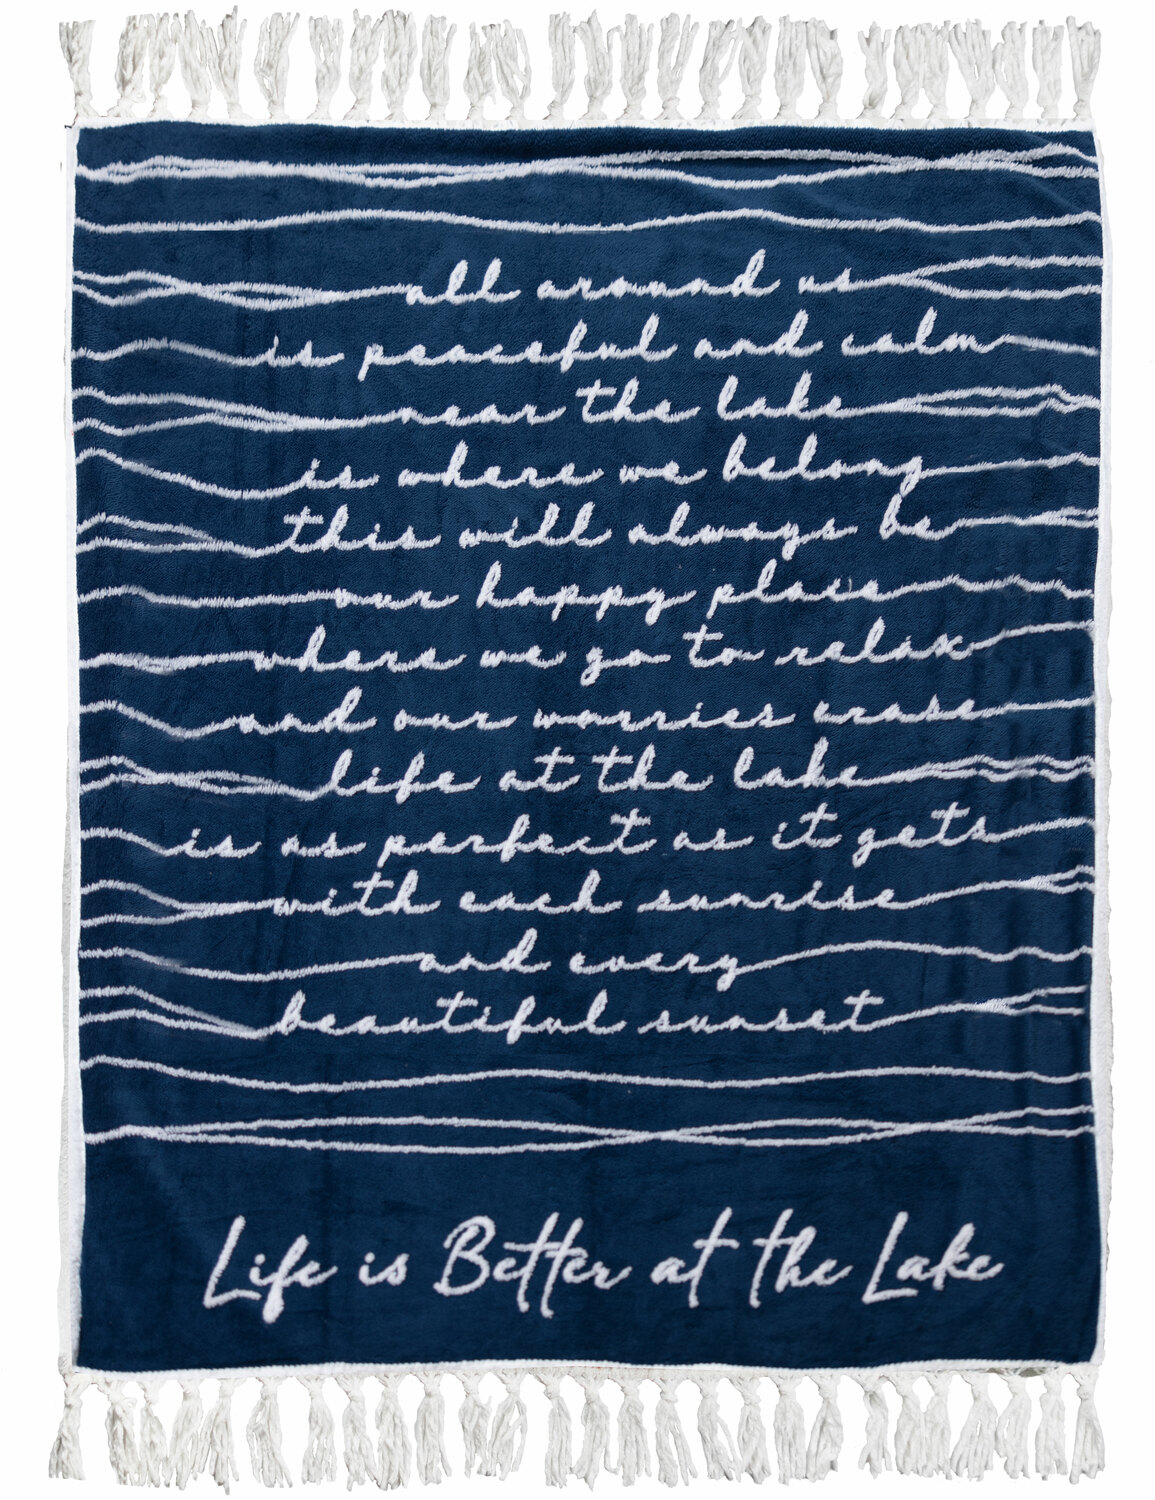 Life Is Better at the Lake by Threaded Together - Life Is Better at the Lake - 50" x 60" Inspirational Plush Blanket